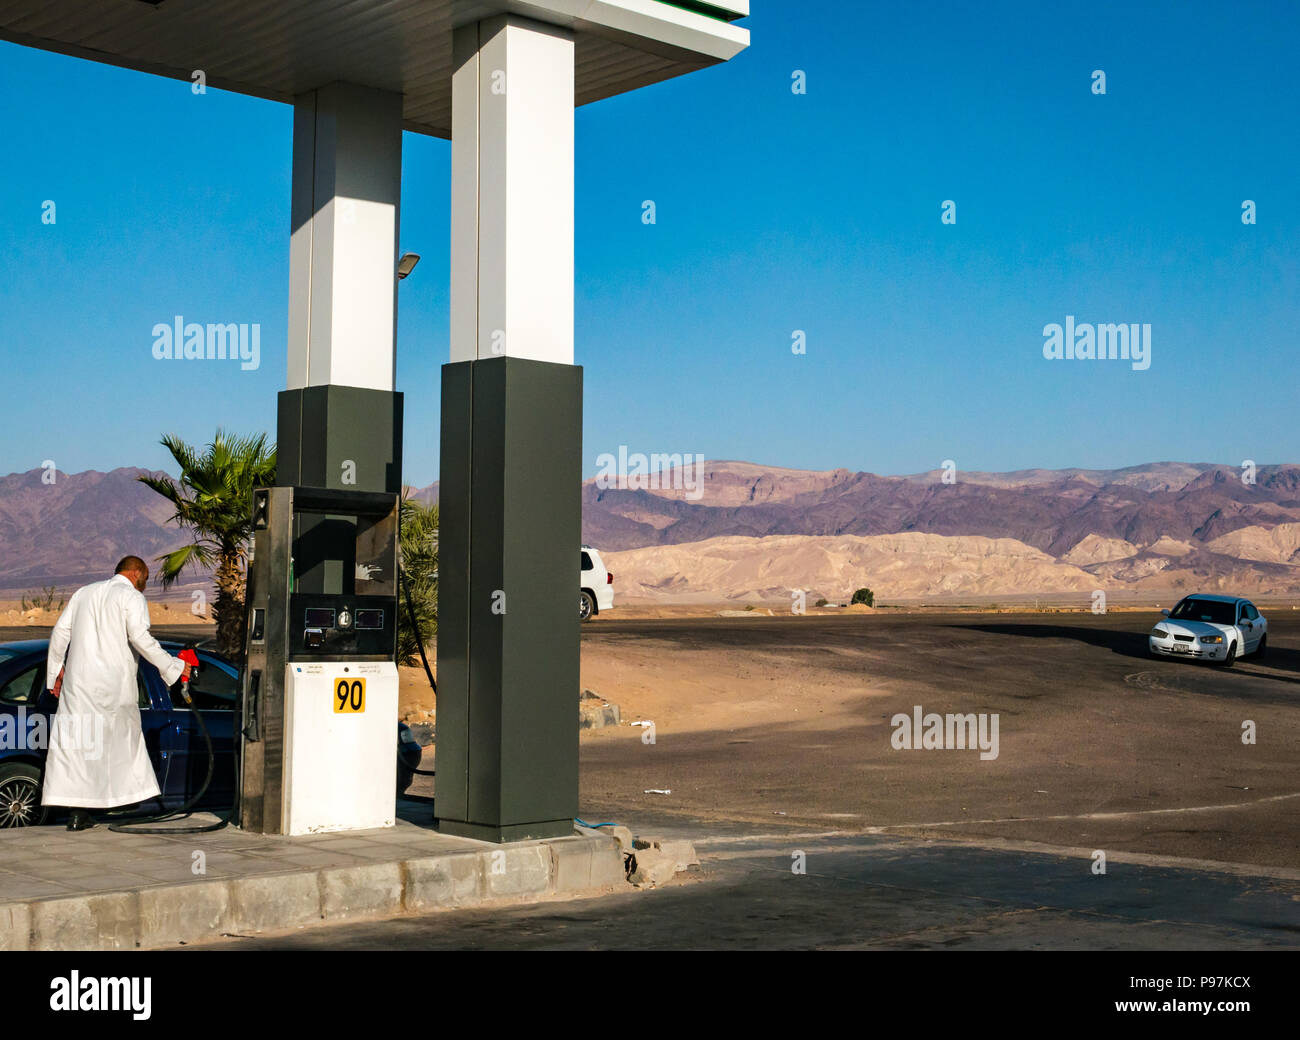 Man in traditional white robe filling car with petrol at desert highway filling station, Jordan, Middle East Stock Photo